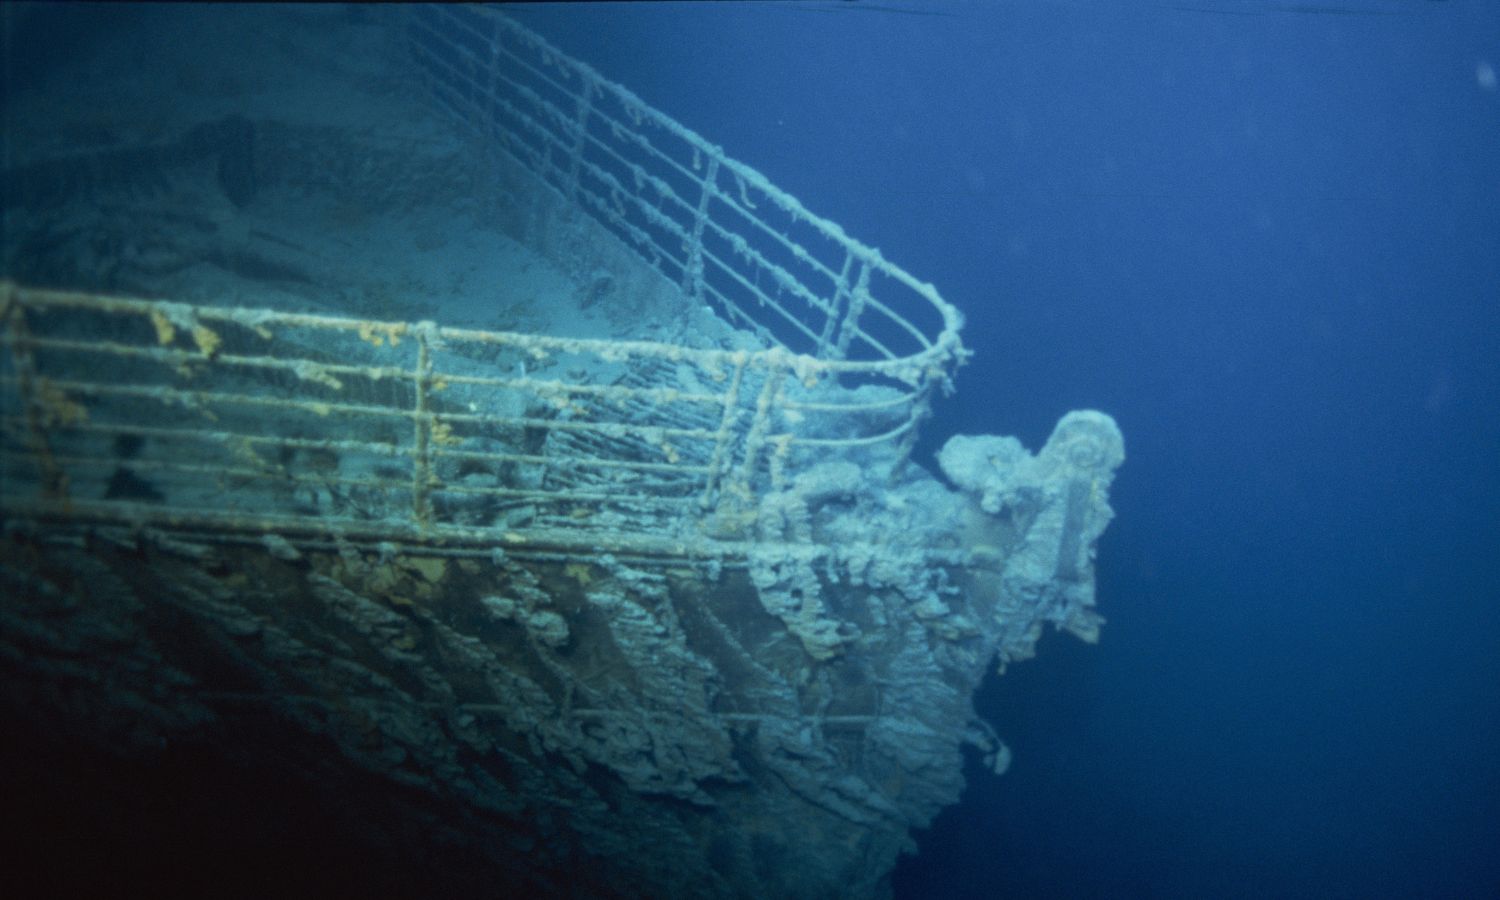 An image showing the bow of the Titanic shipwreck